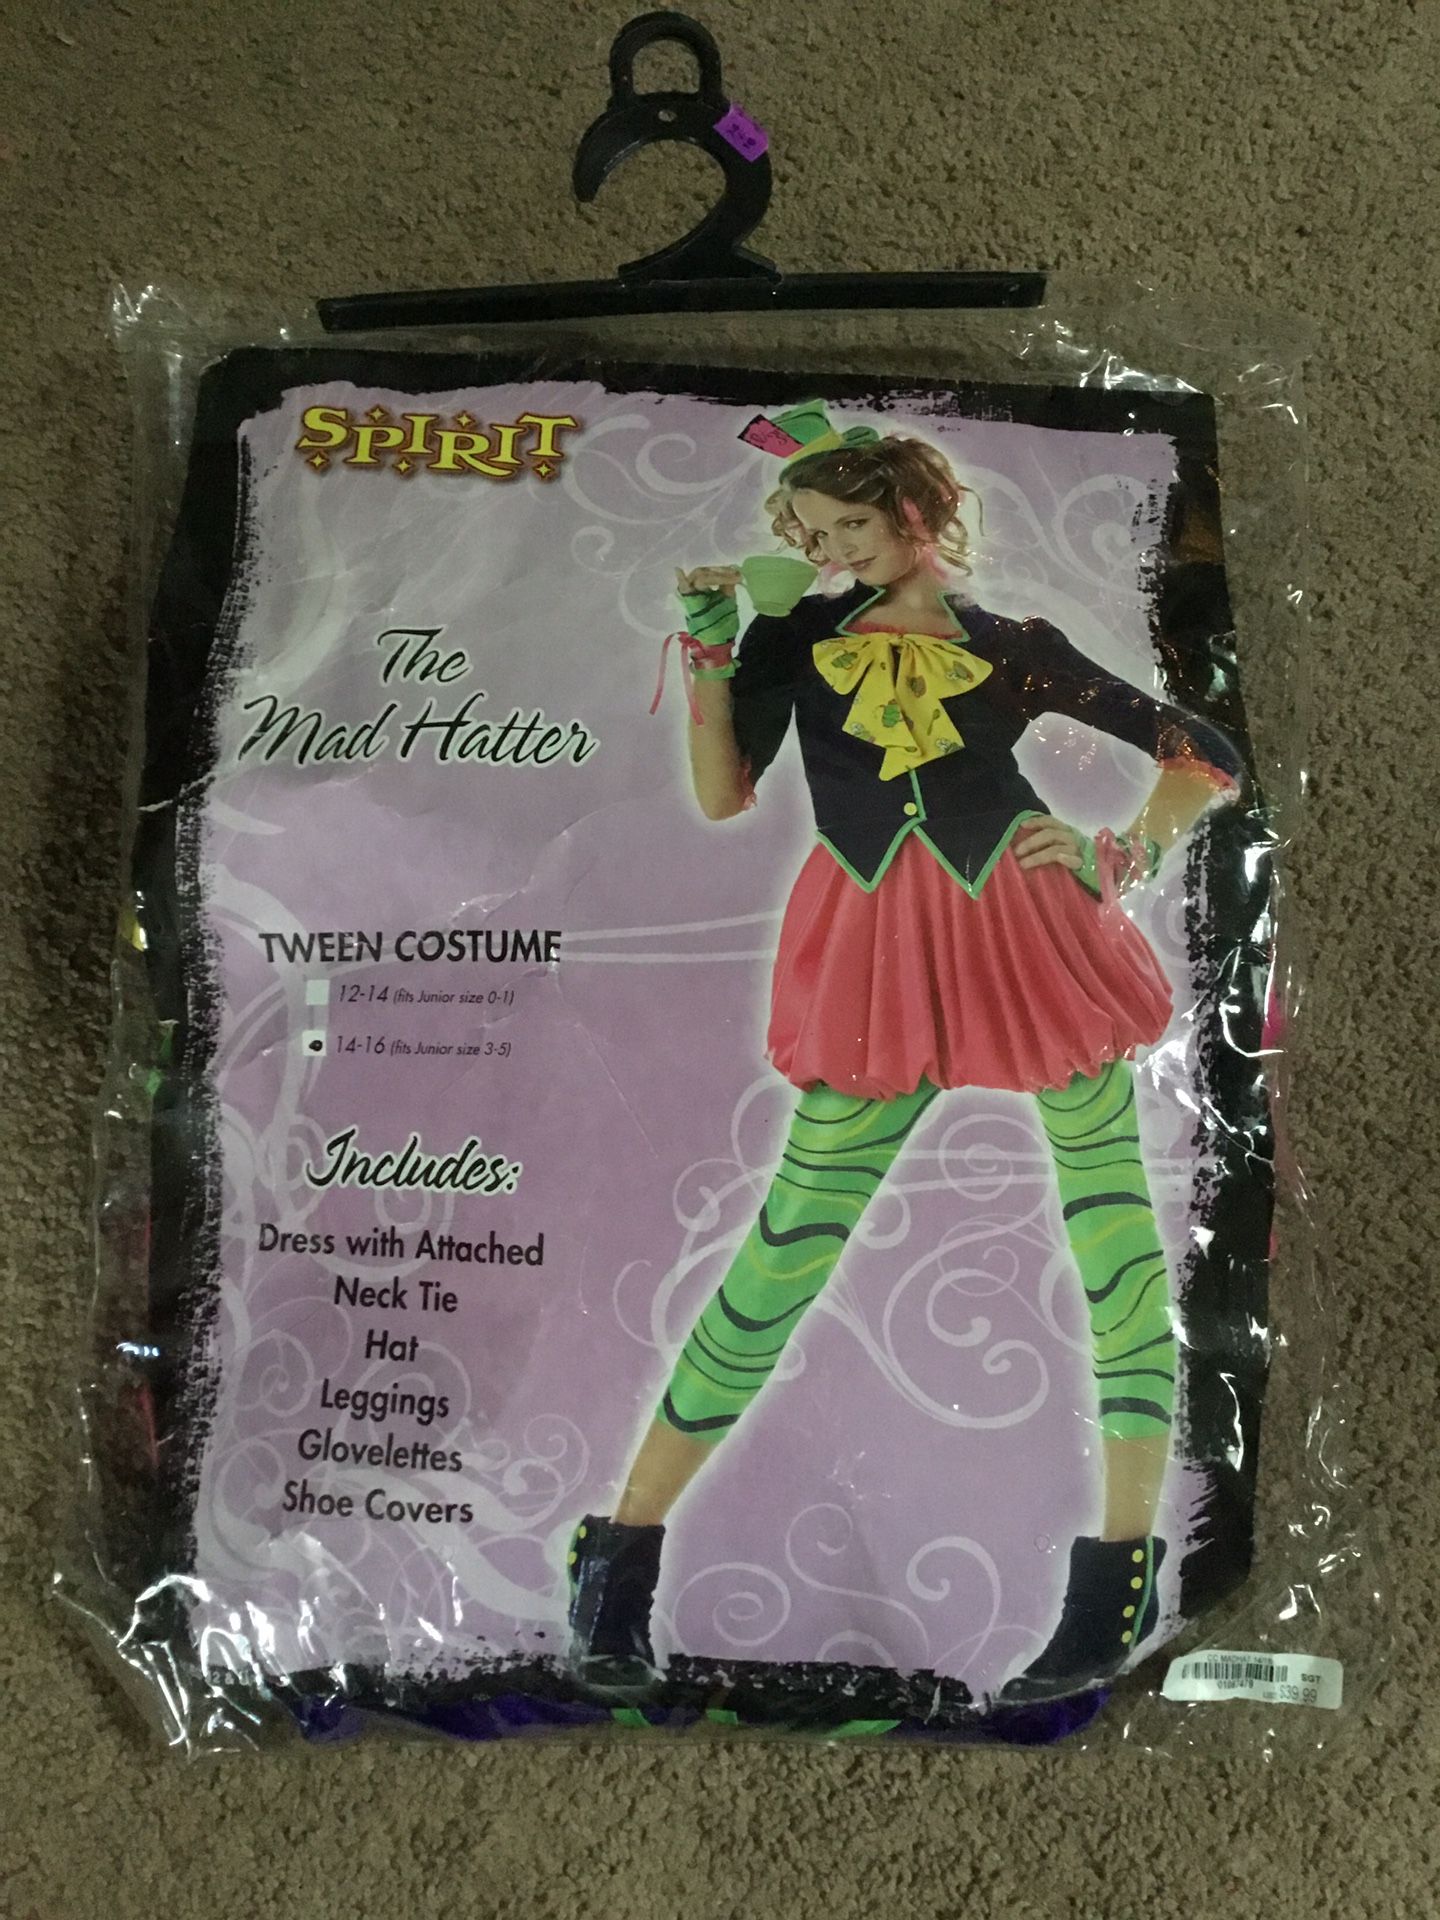 The mad hatter Halloween costume